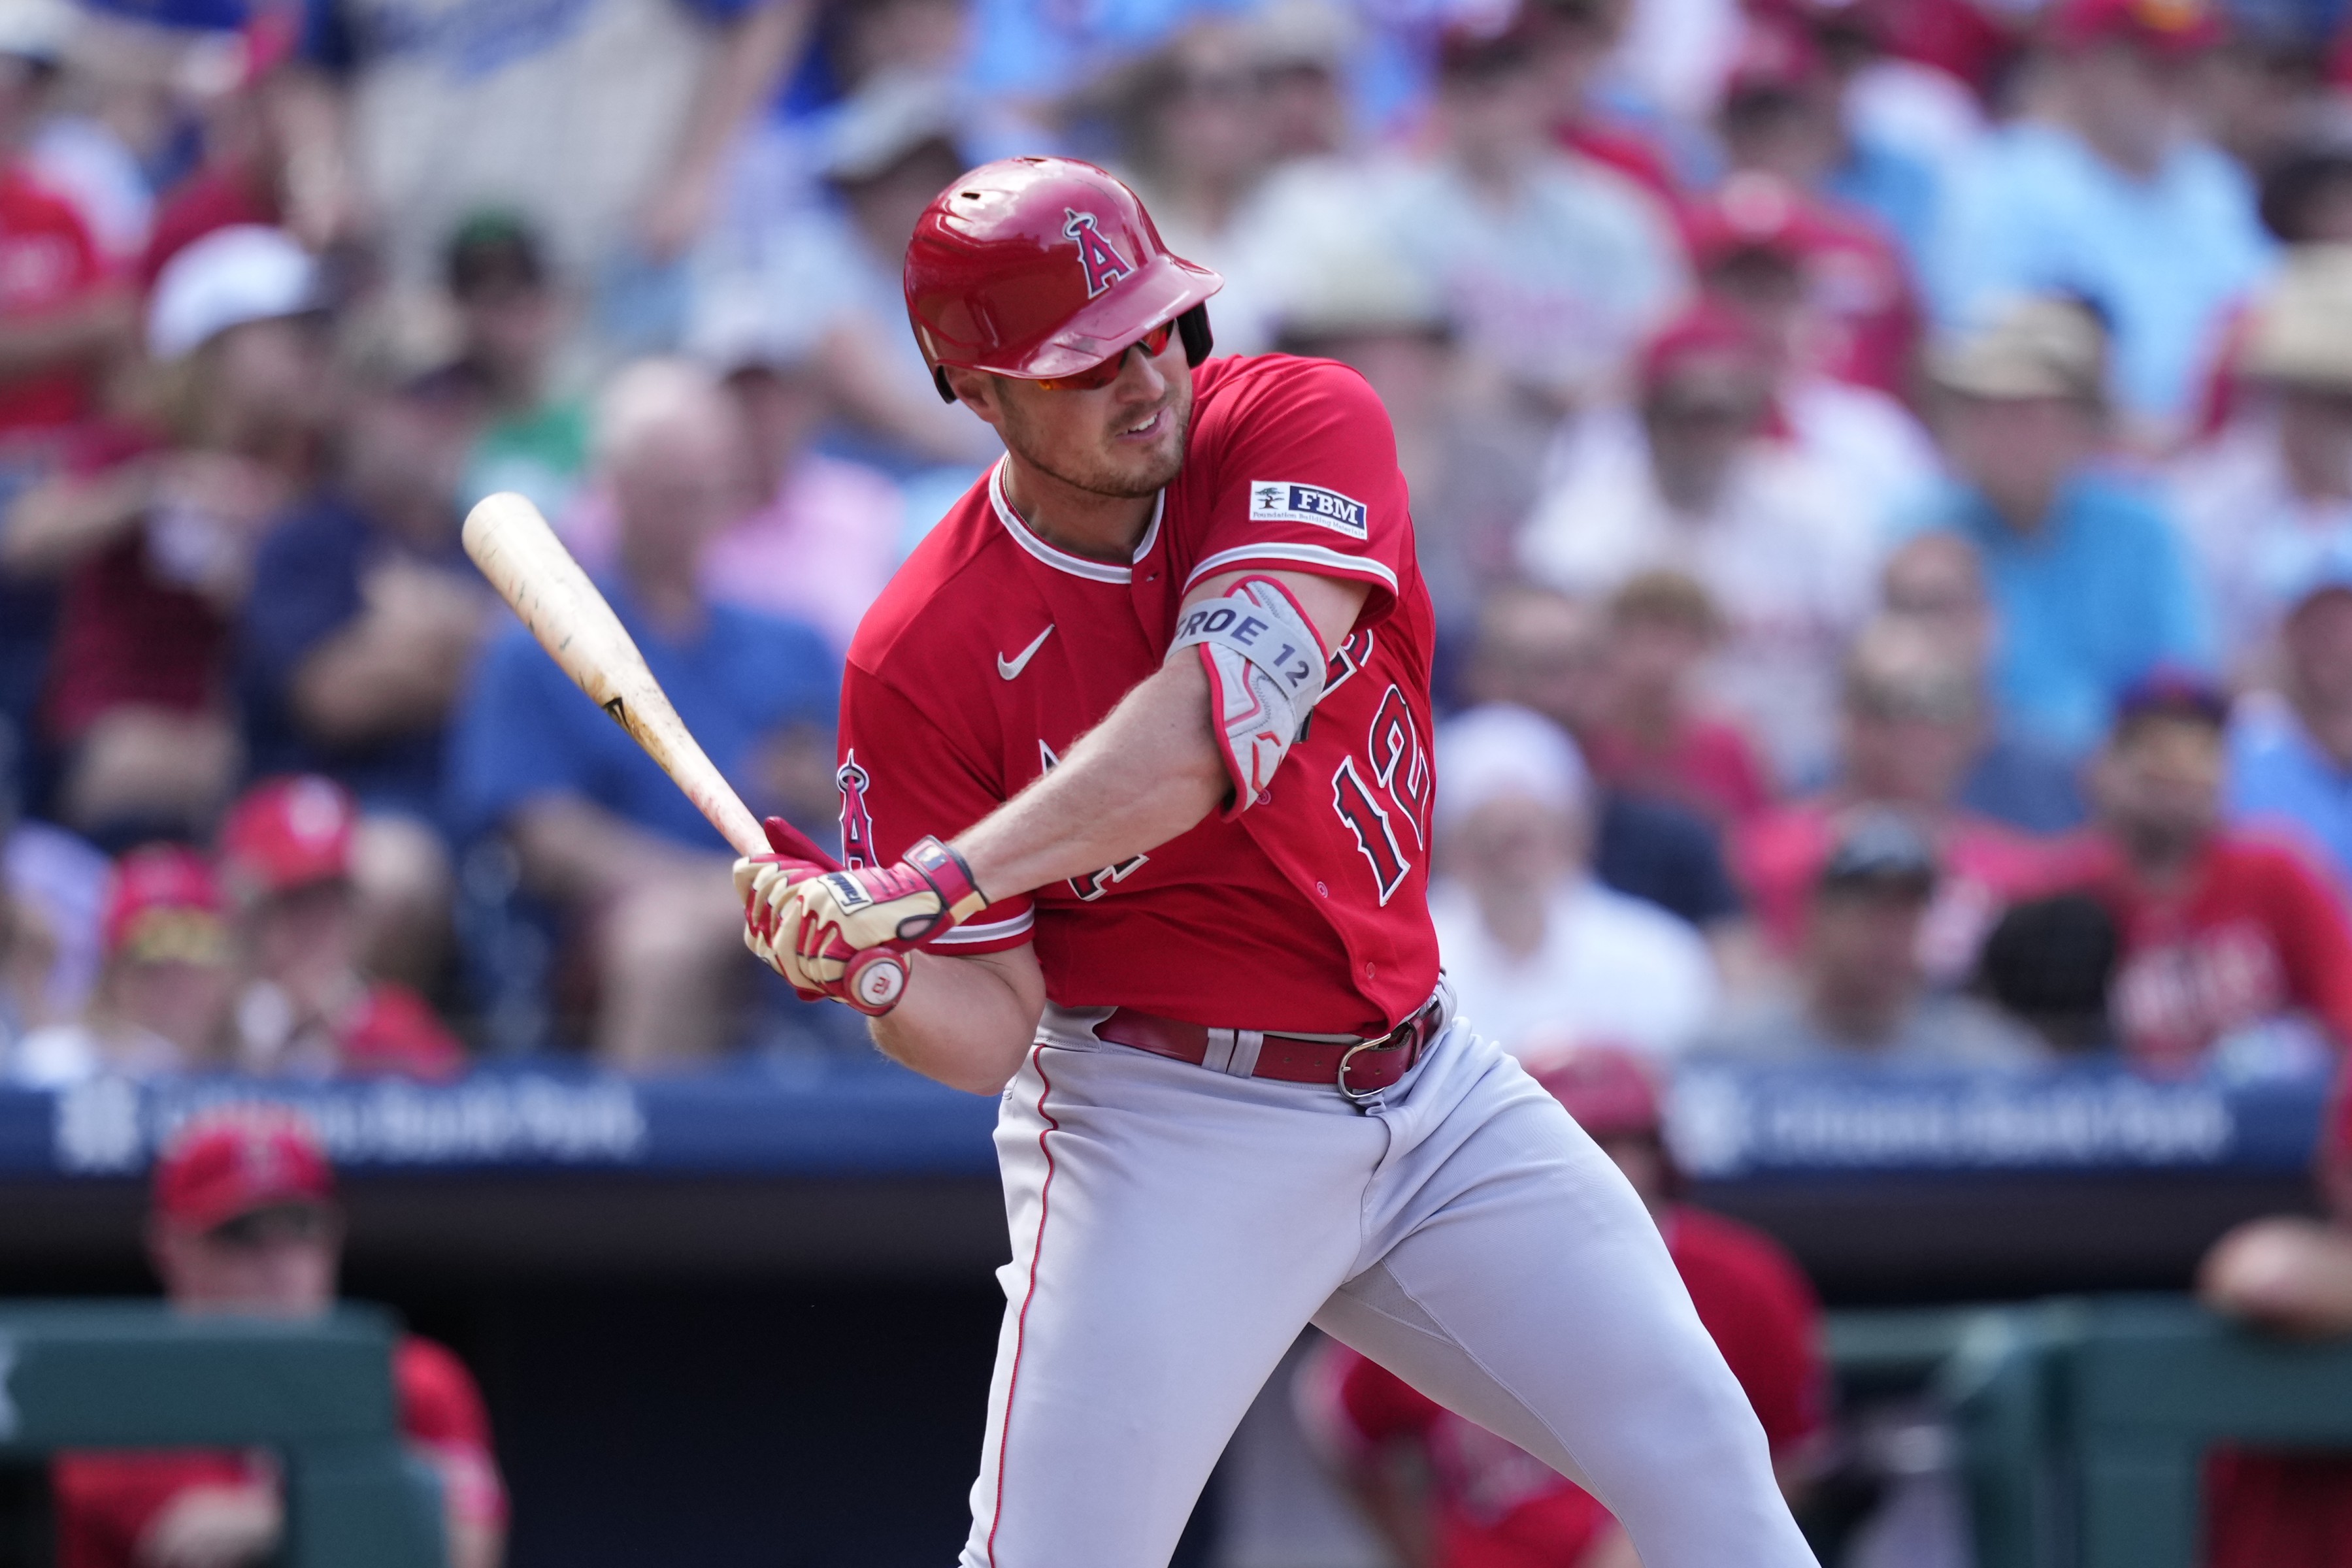 Cincinnati Reds claim outfielder Harrison Bader on waivers from